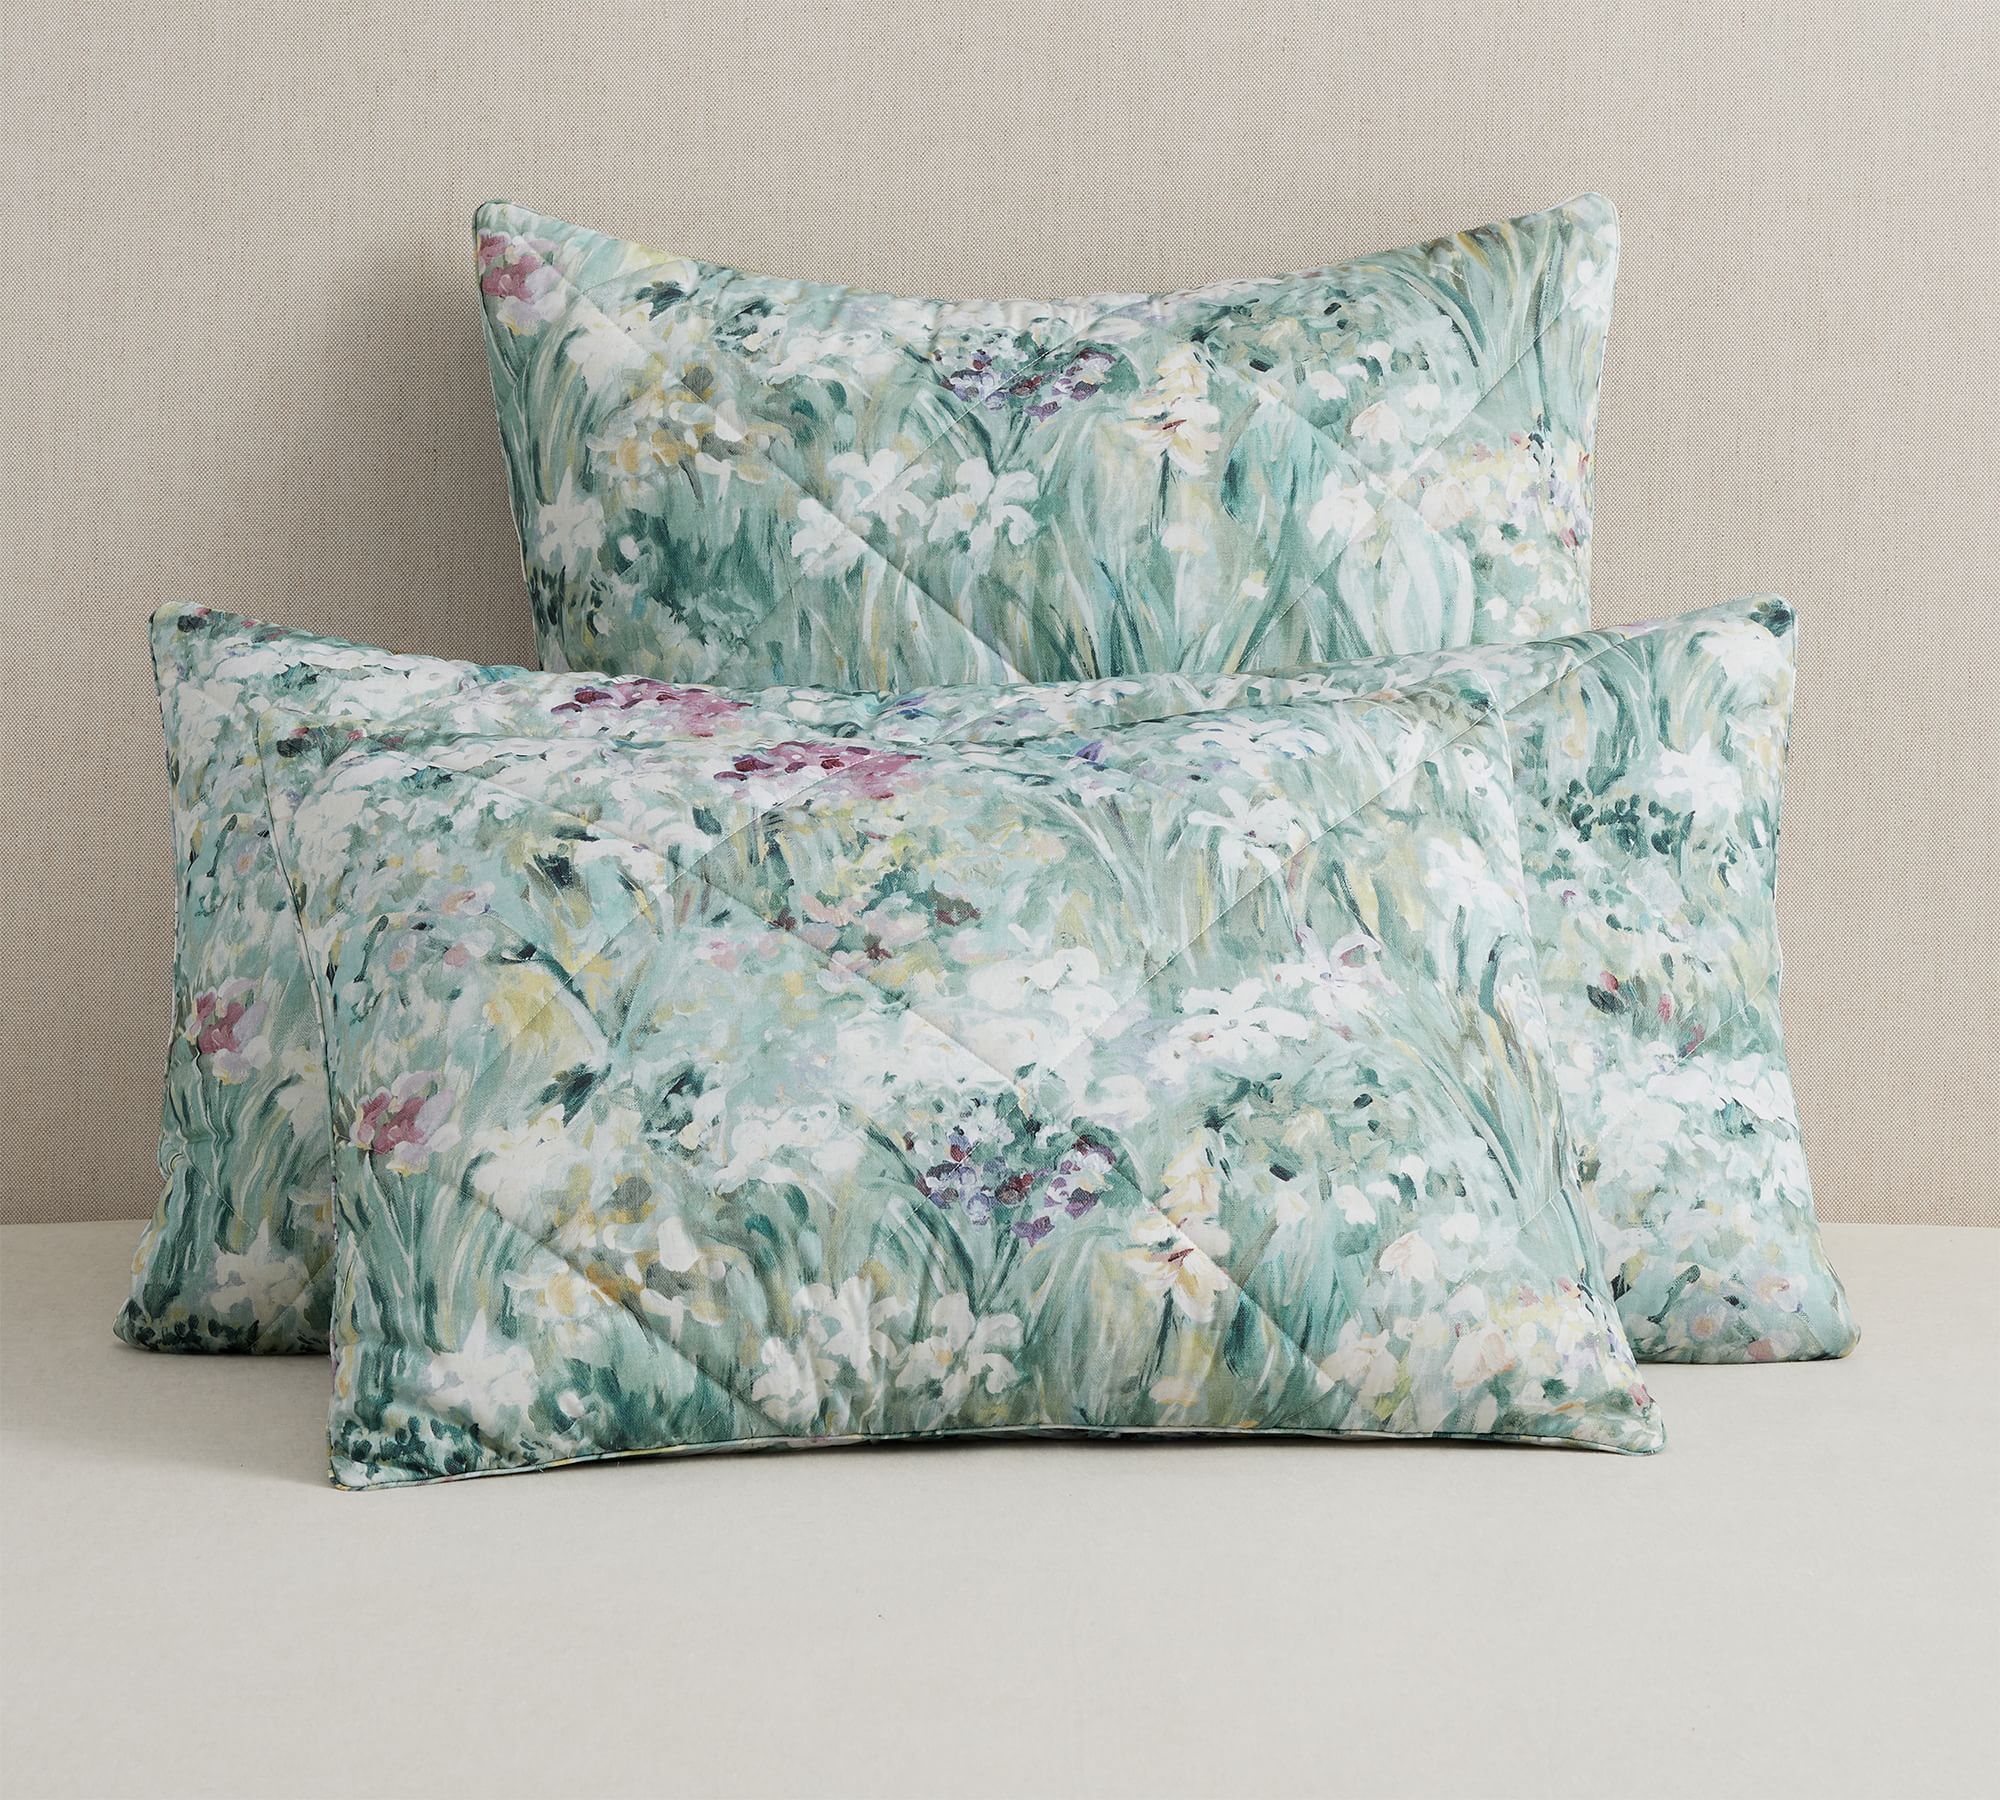 Giverny Fleur Percale Comforter Sham